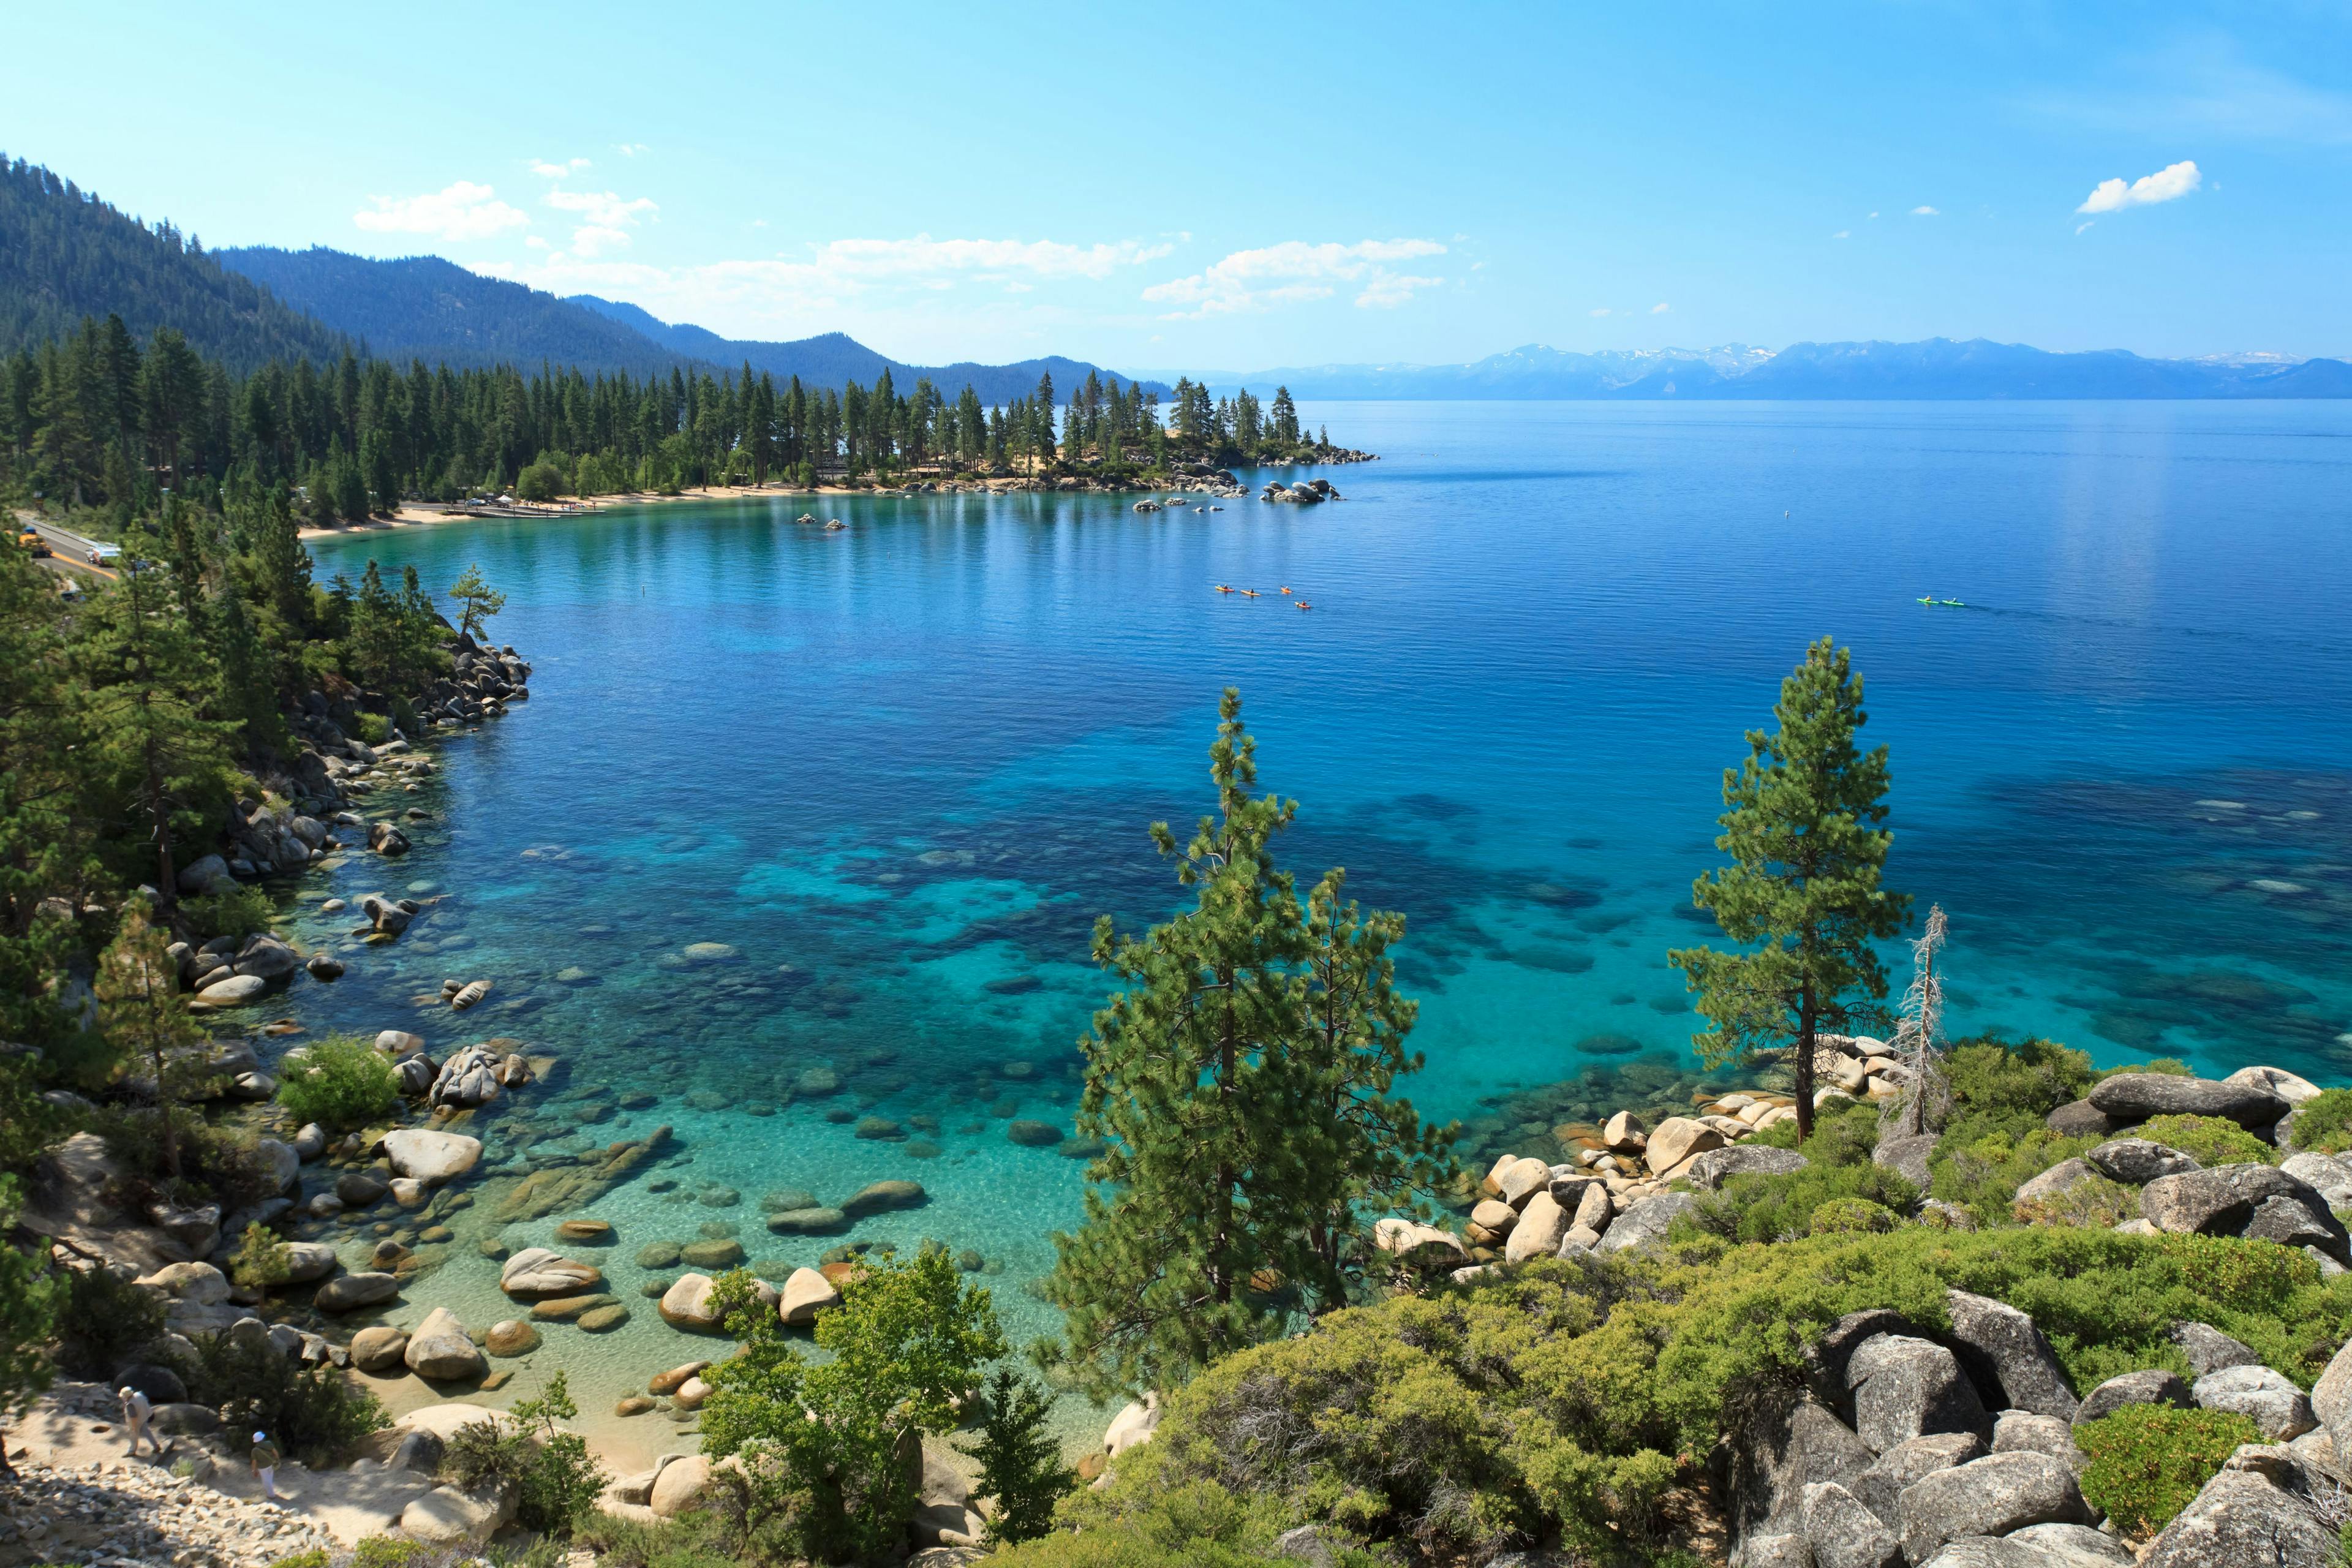 10 Places with the Bluest and Clearest Waters in the World - Lake Tahoe, California - ratepunk